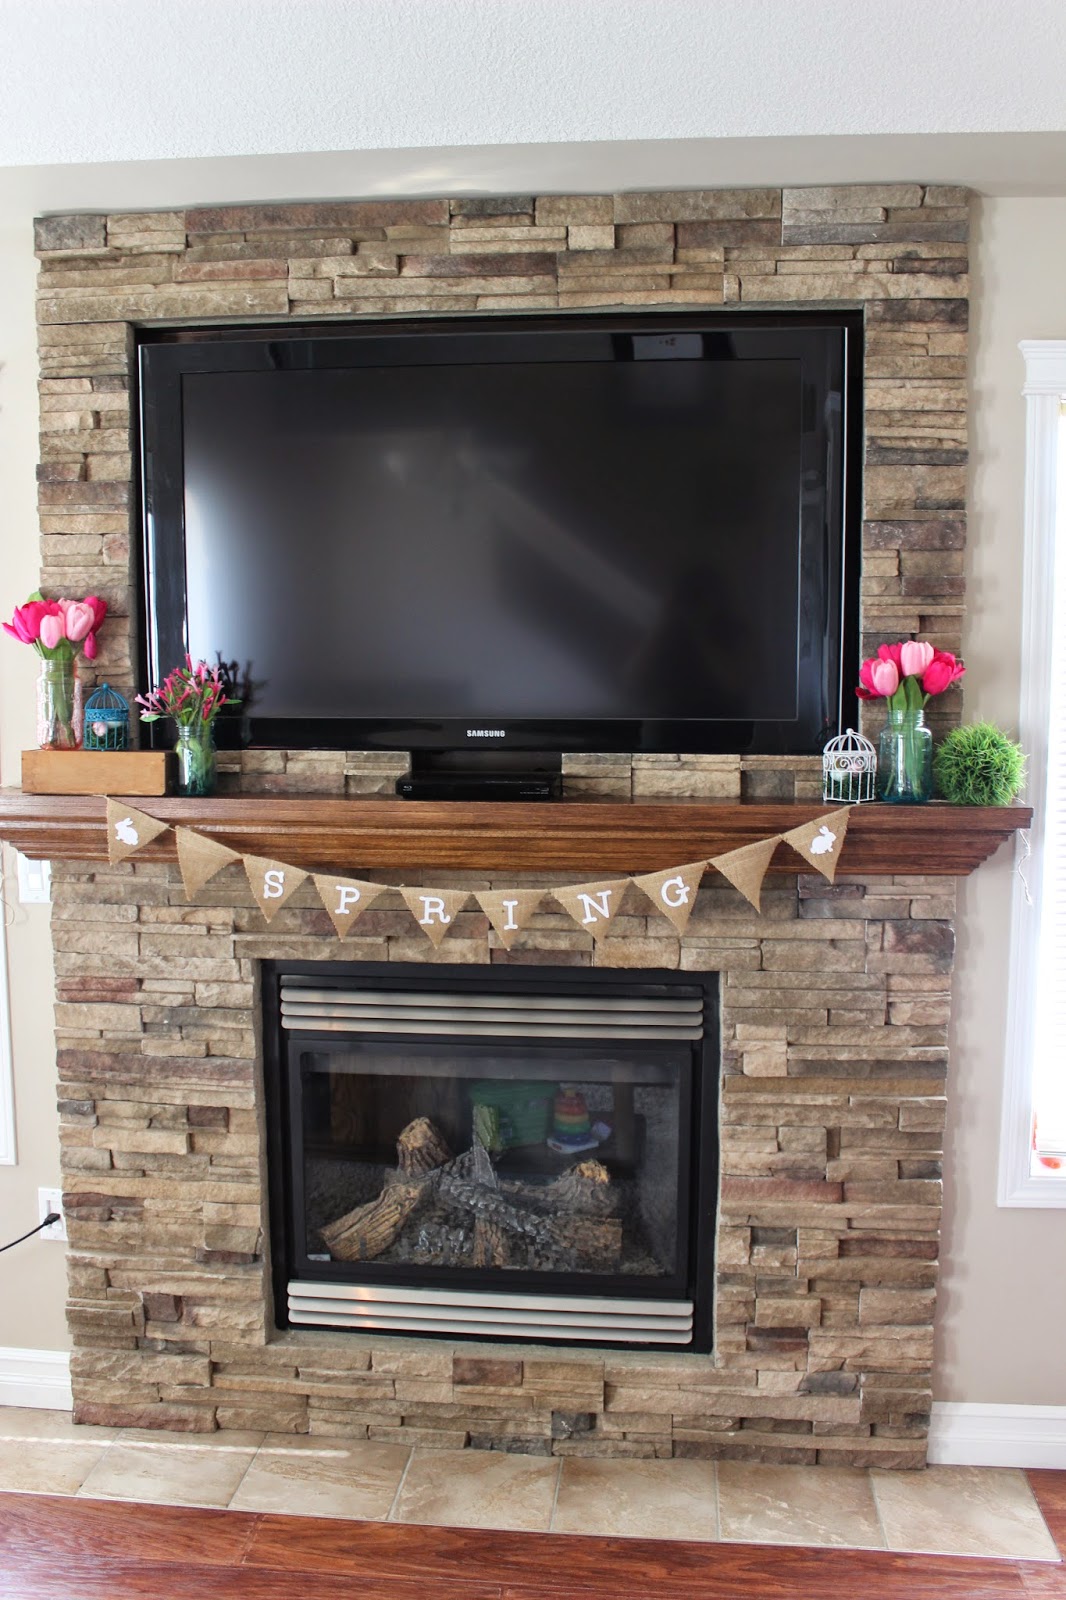 A beautifully decorated Spring mantle. Love this brick fireplace, beautifully decorated with bright Spring colours and florals.